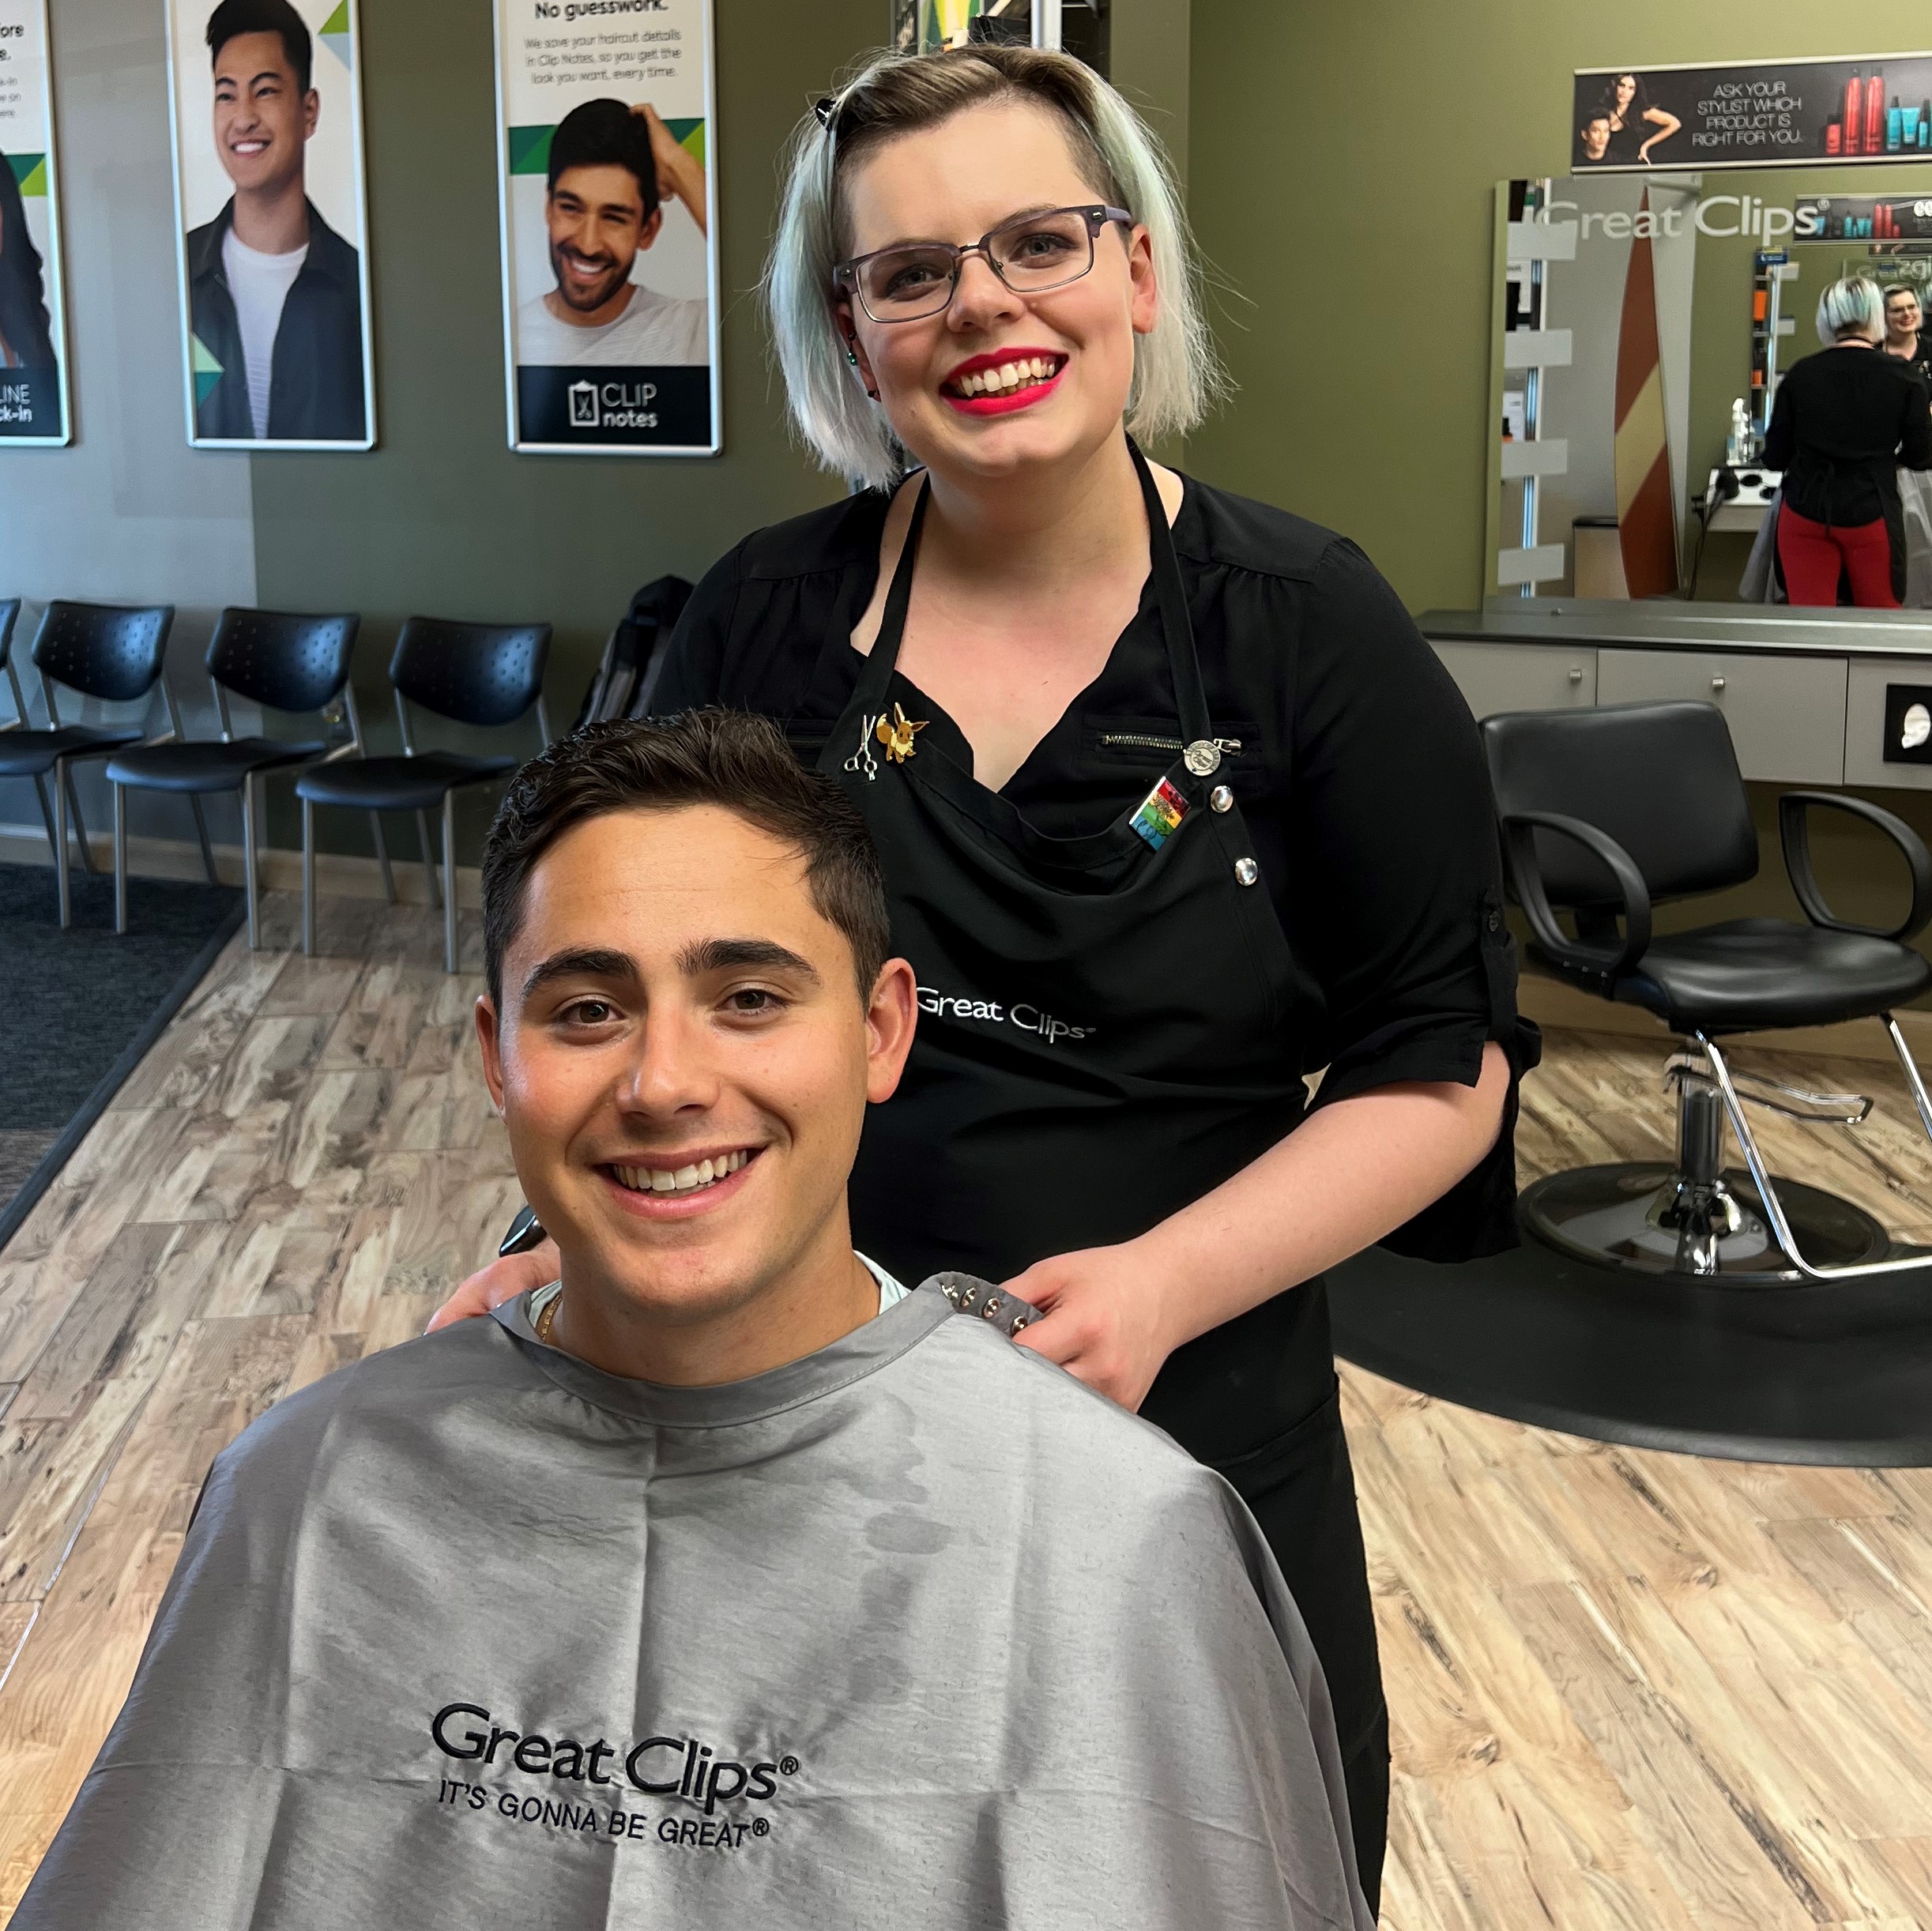 Great Clips (@greatclips) • Instagram photos and videos